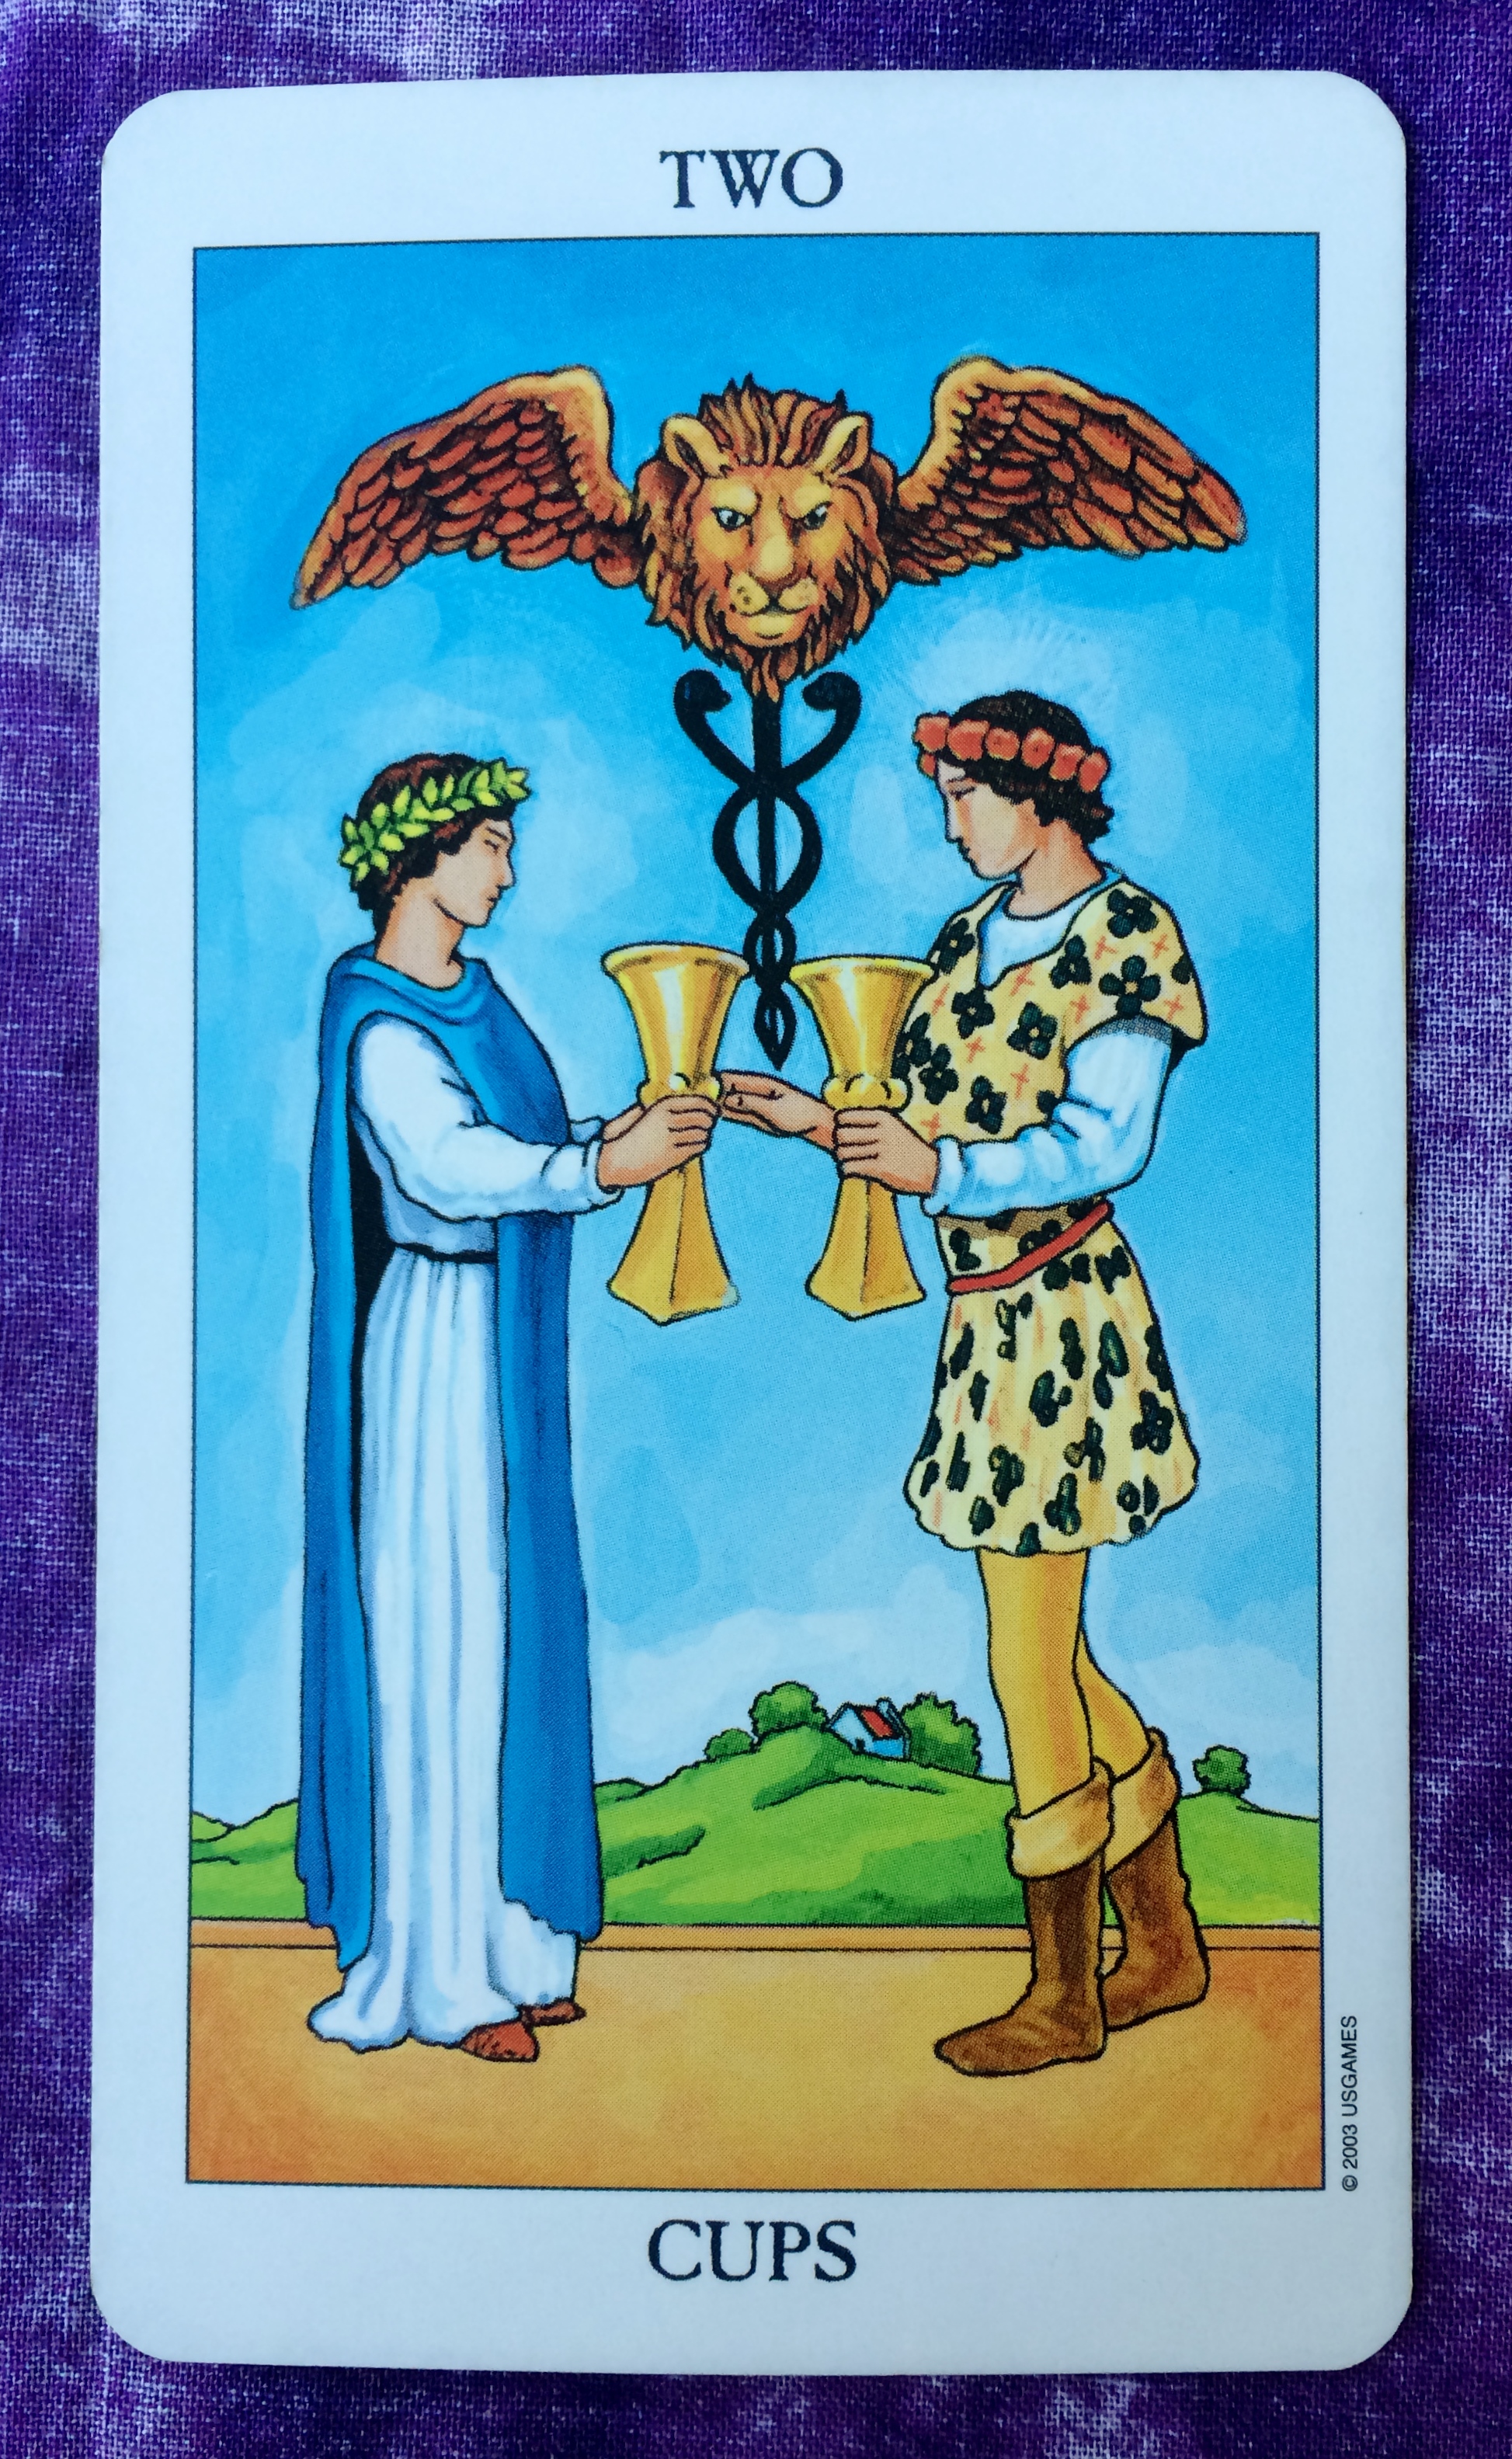 Tarot Card Reading for Today; February 25, 2023: Avoid doubting your abilities and refrain from emotional consumption of food